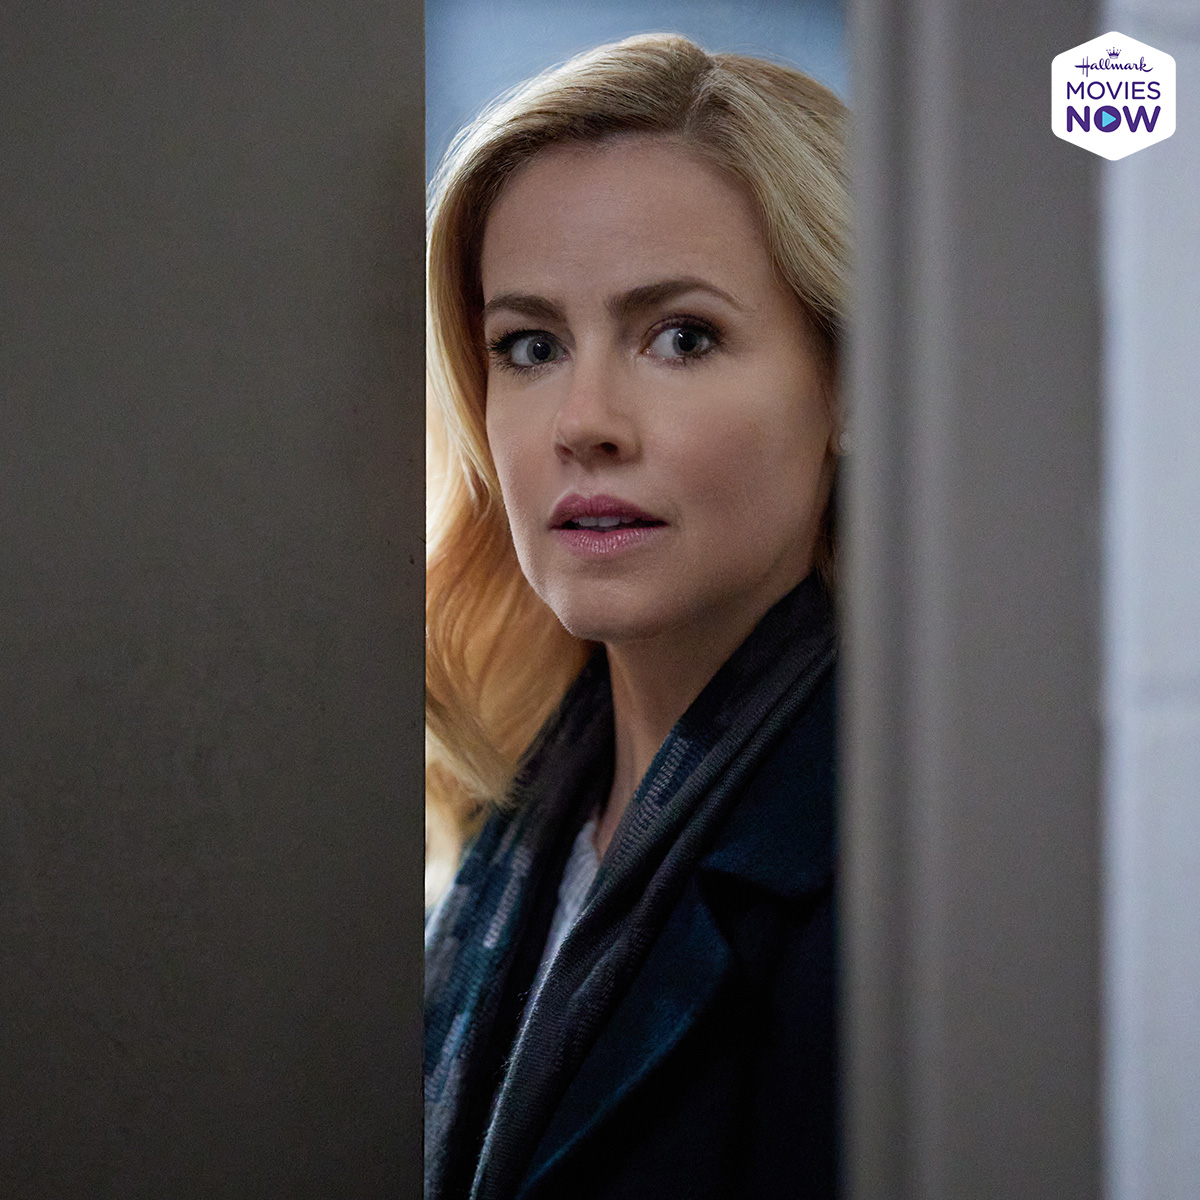 Will Rachell @amandaschull figure out the next #WhoDunnit? Find out in the All New Hallmark Original, #FamilyPracticeMysteries: Coming Home now on #HallmarkMoviesNow! #Sleuthers